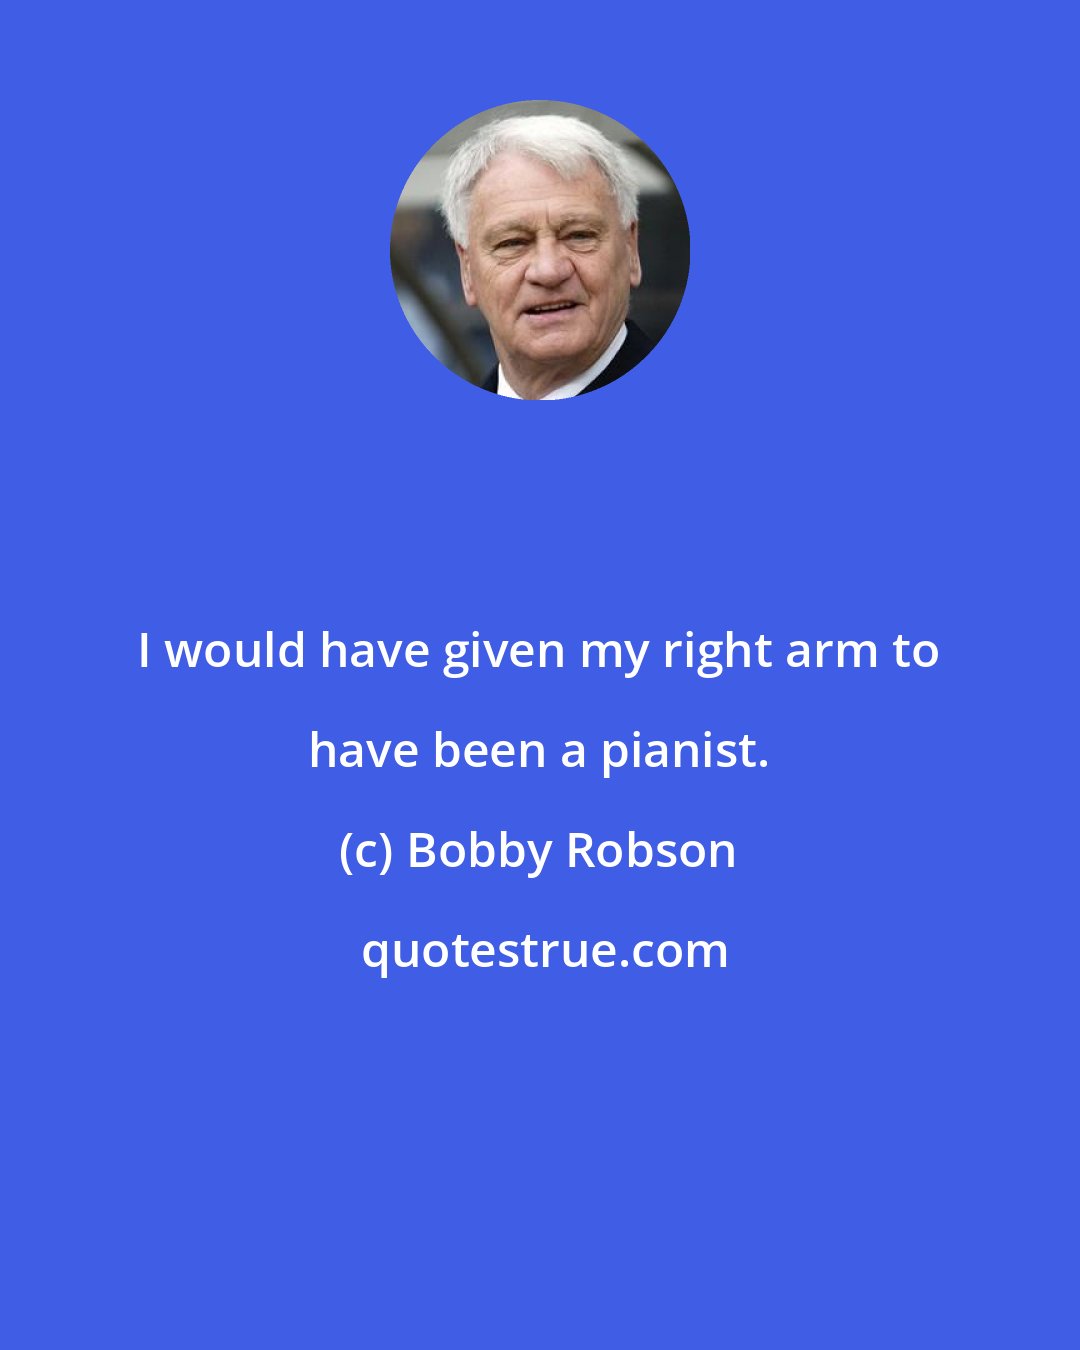 Bobby Robson: I would have given my right arm to have been a pianist.